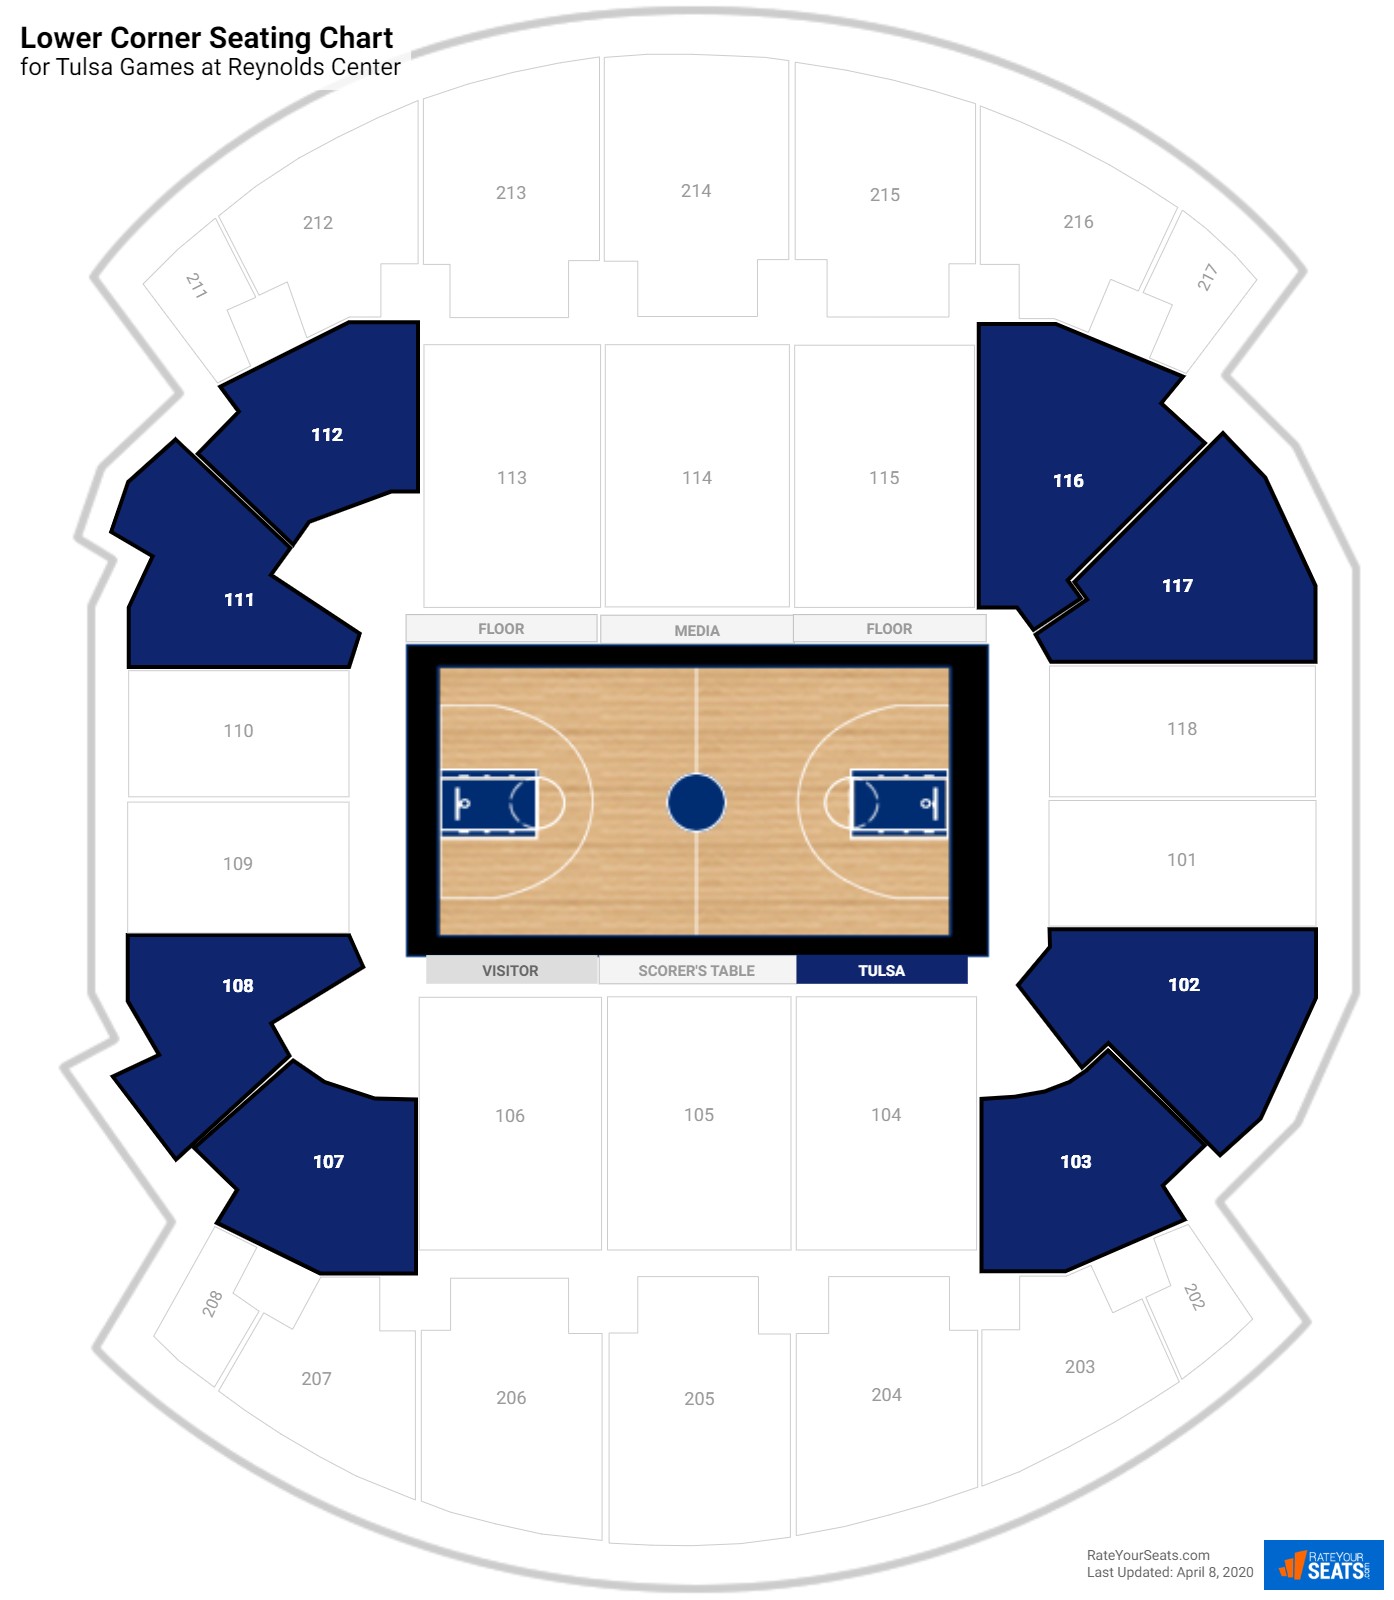 Reynolds Center (Tulsa) Seating Guide - RateYourSeats.com